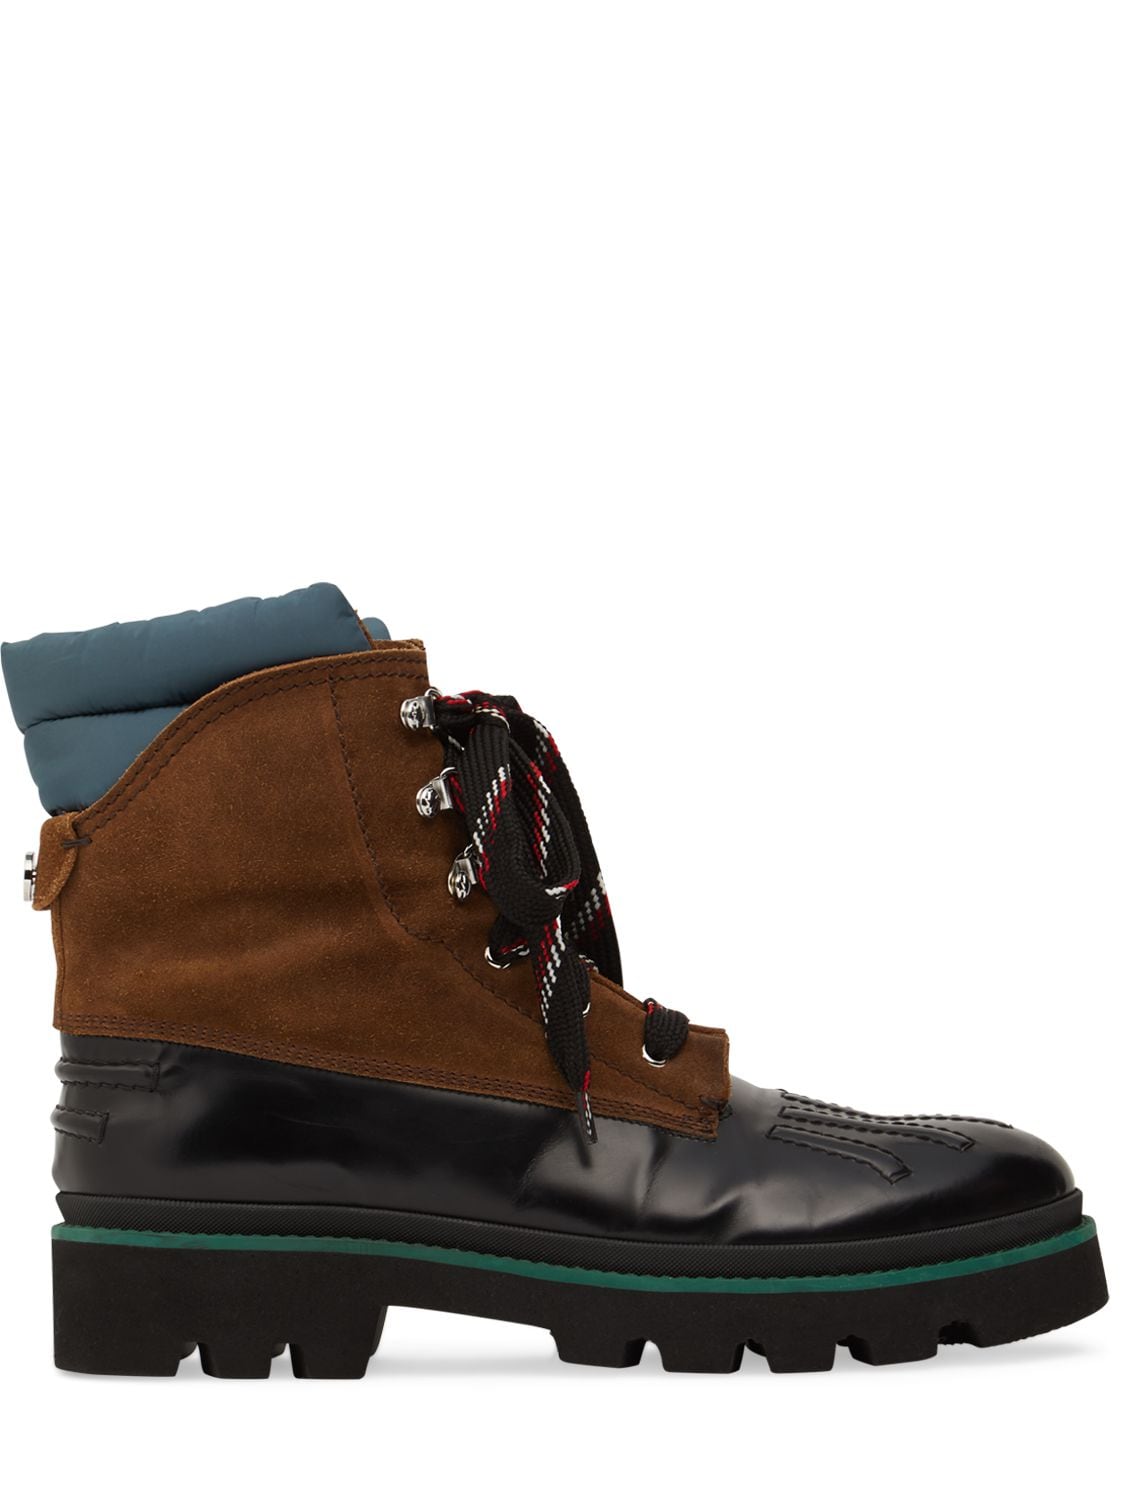 Canvas & Leather Hiking Boots